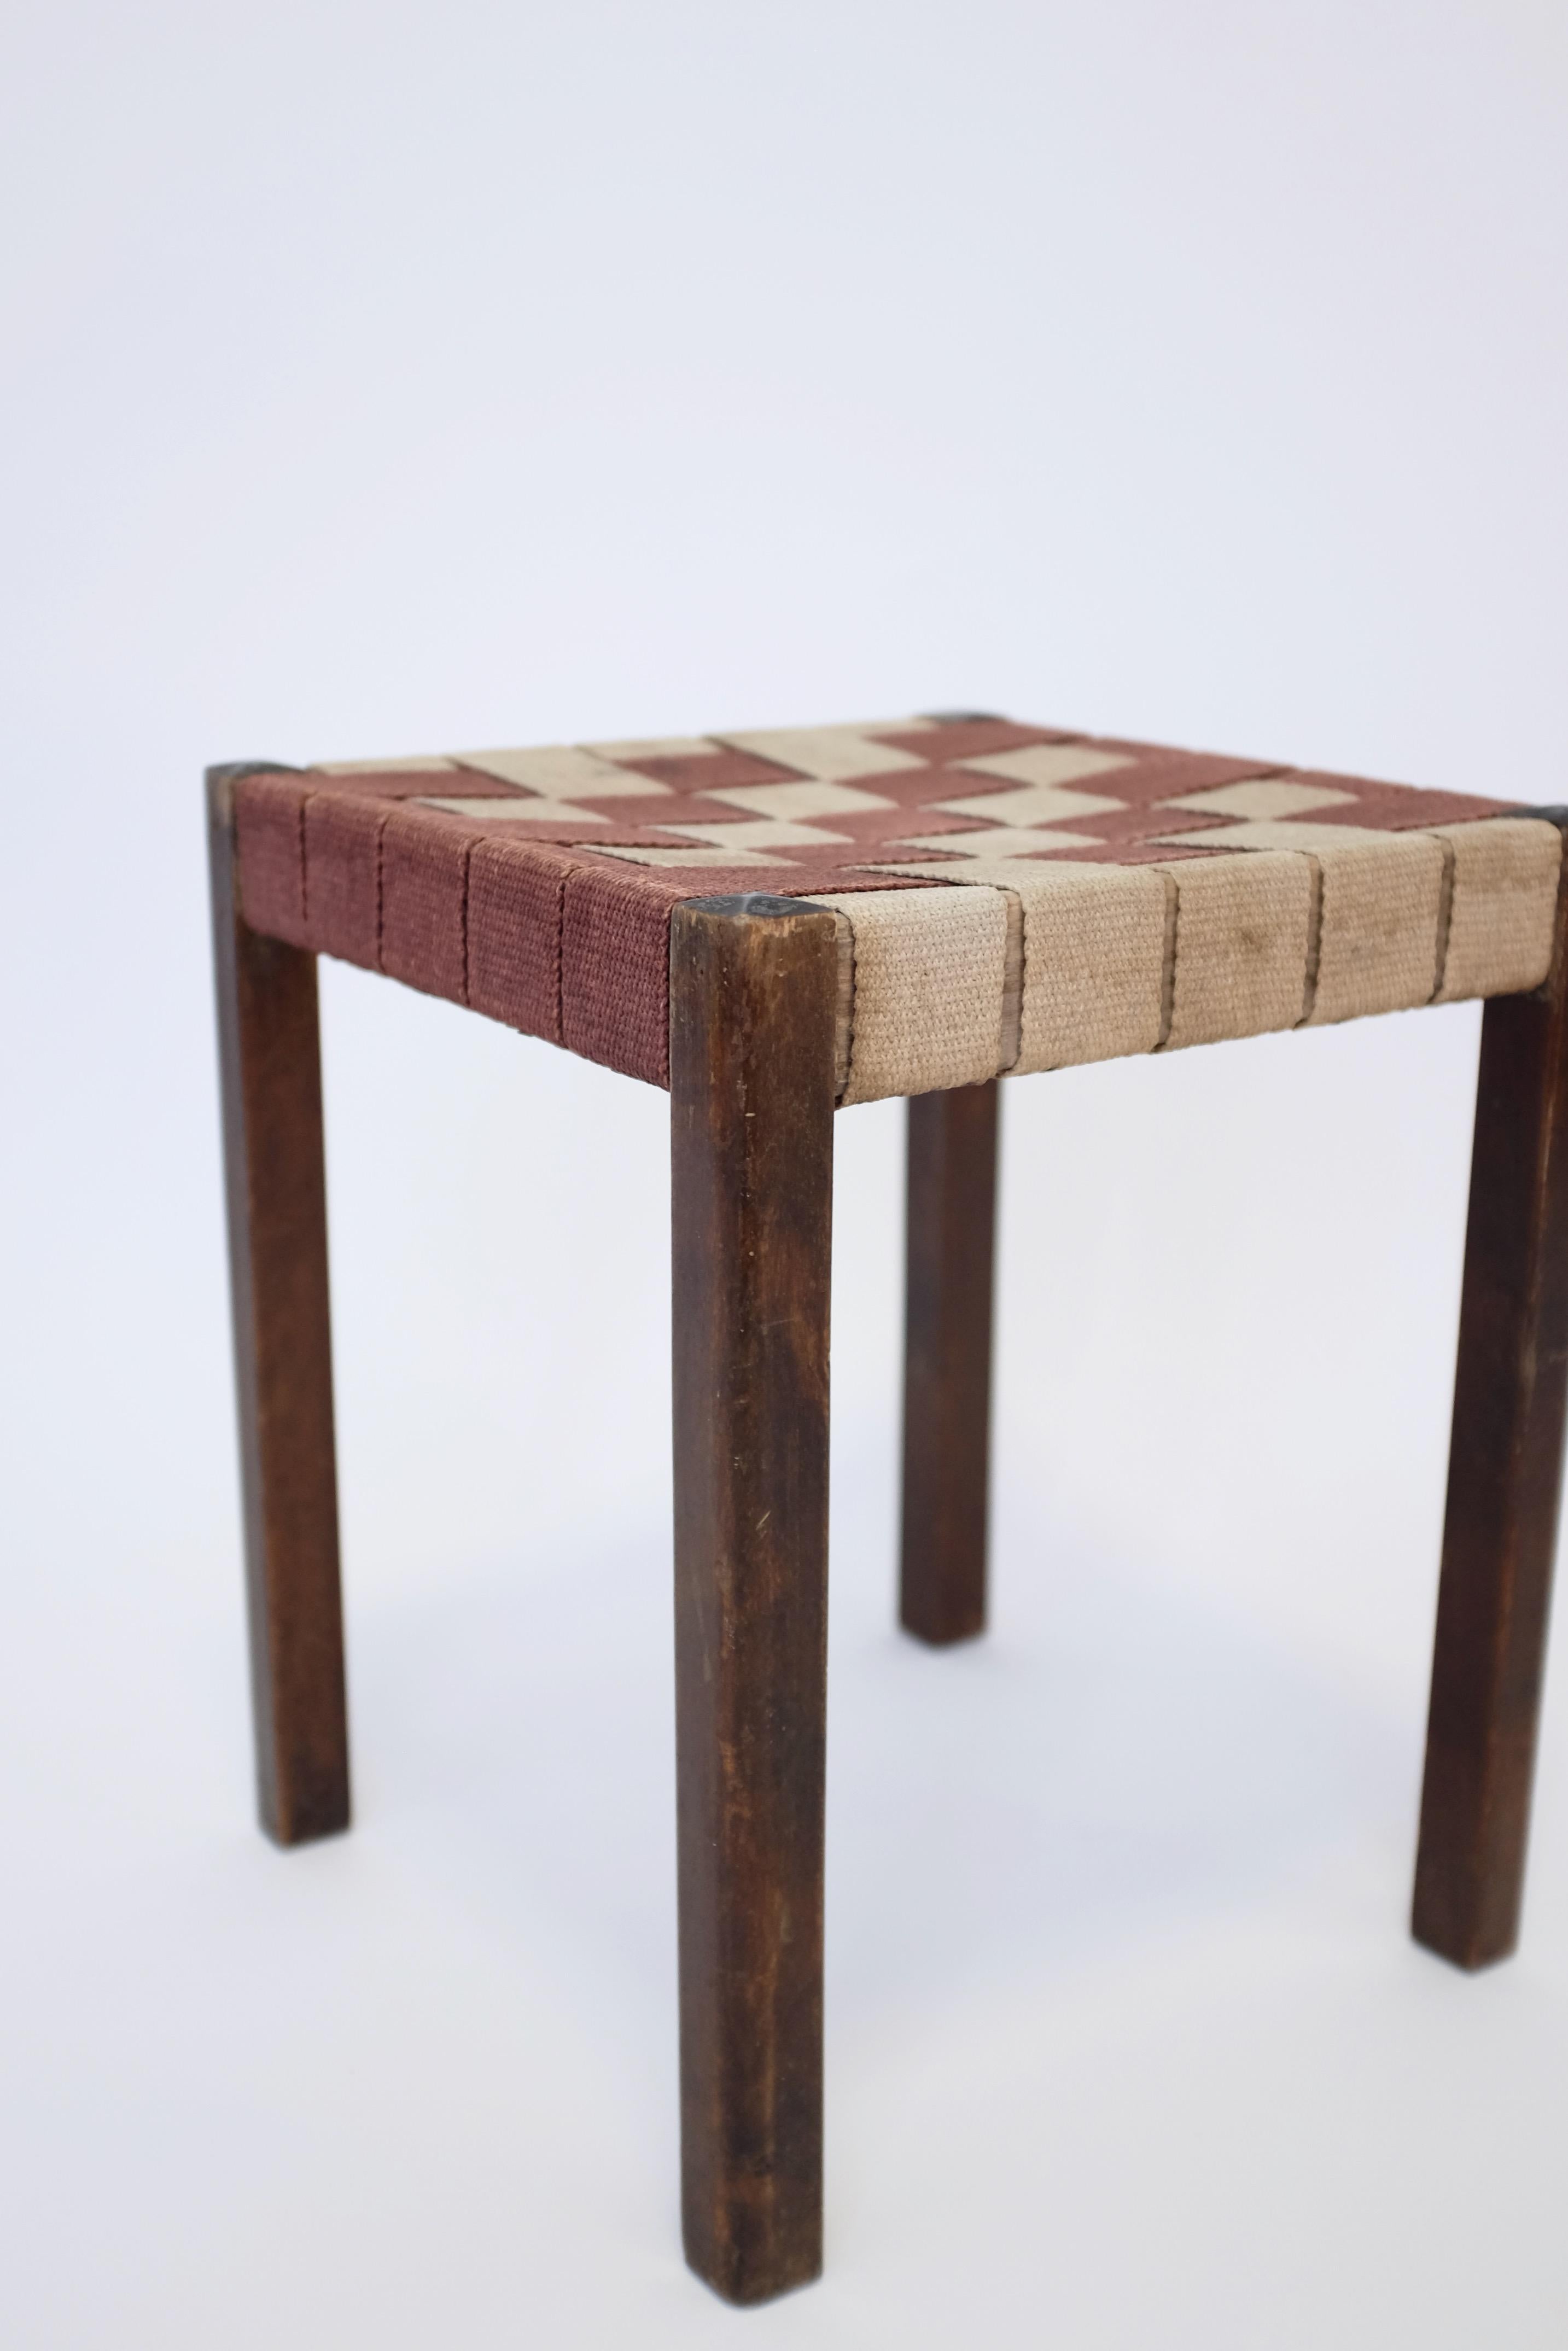 Charming 1930's webbed stool by Axel Larsson for Bodafors, a Swedish furniture company. Made of stained birch with a red-brown and beige canvas webbing it is typical for the kind of practical and modern looking furniture that was produced during